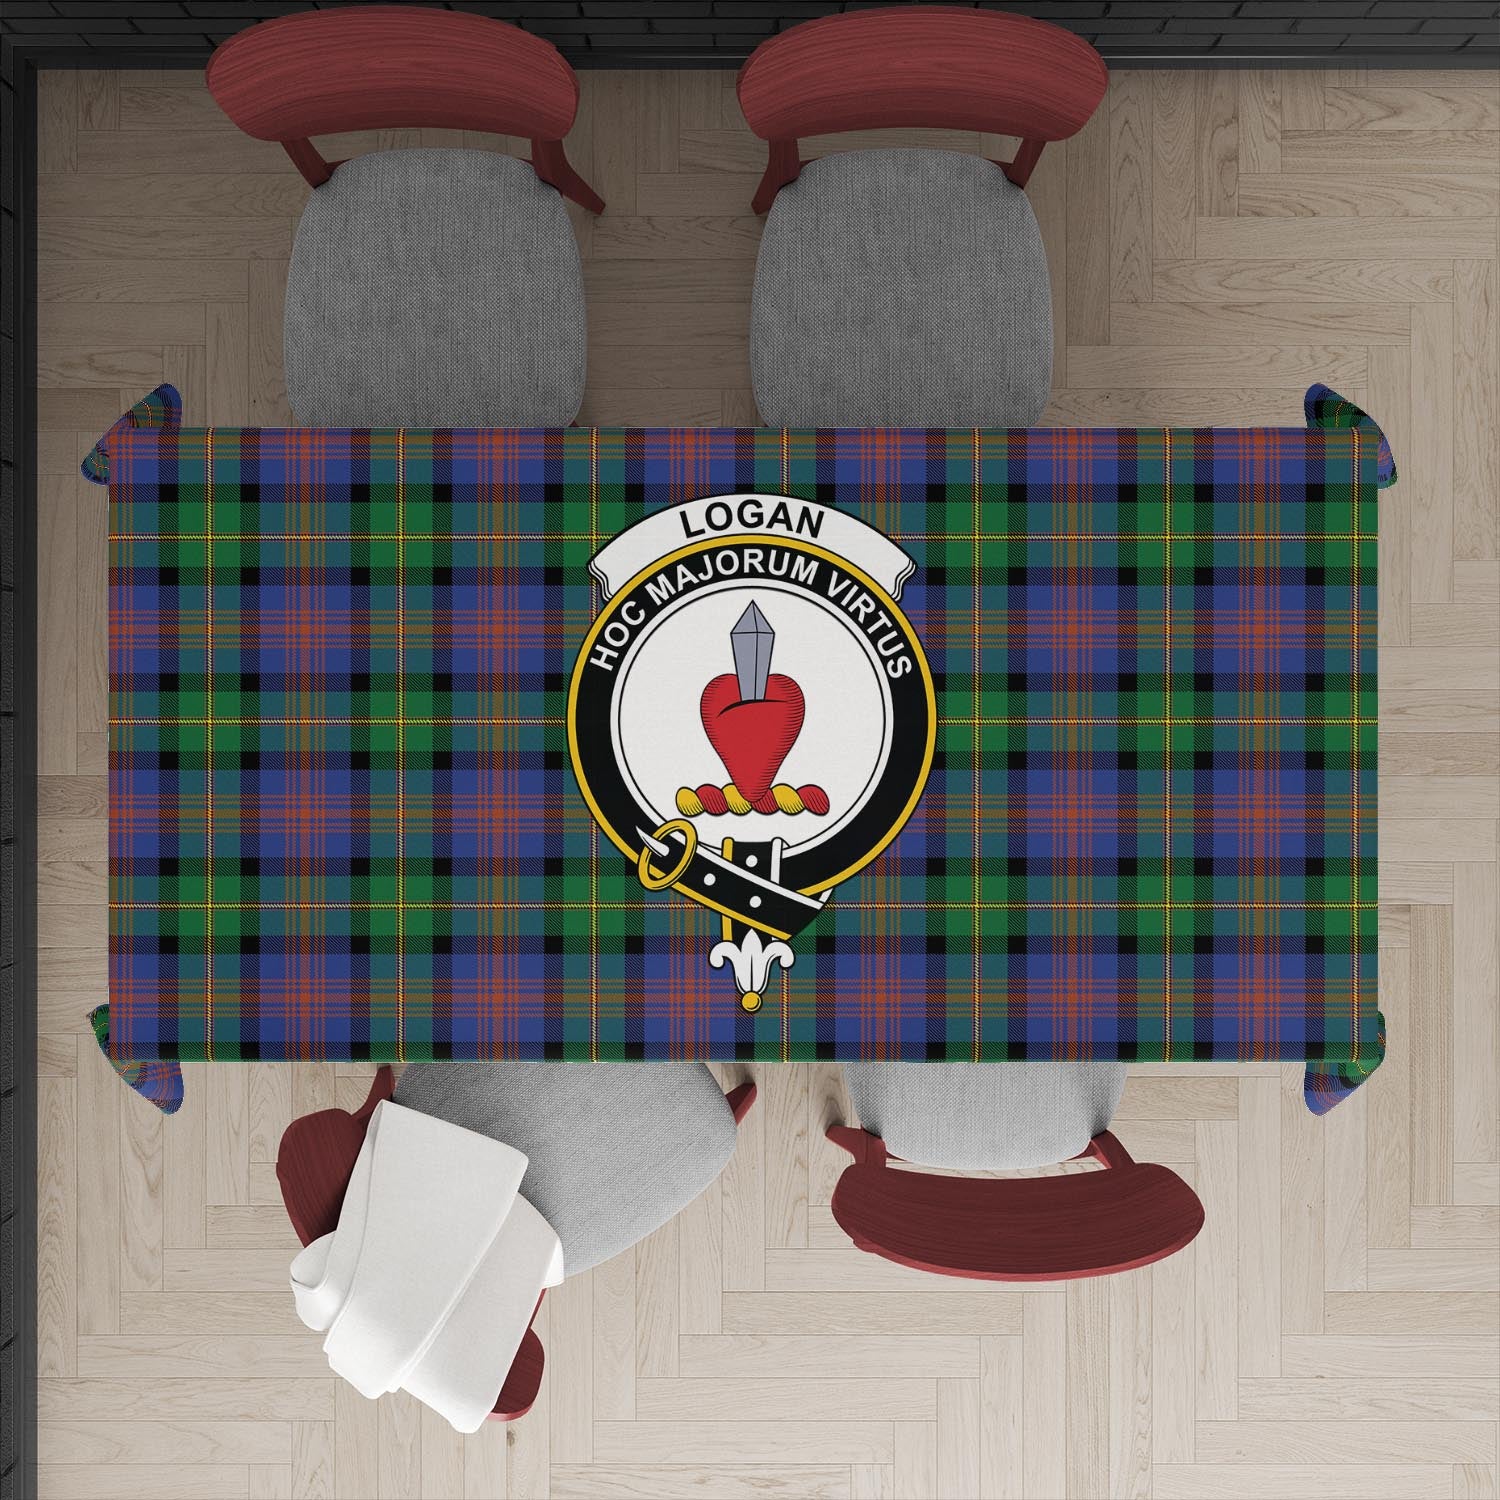 logan-ancient-tatan-tablecloth-with-family-crest